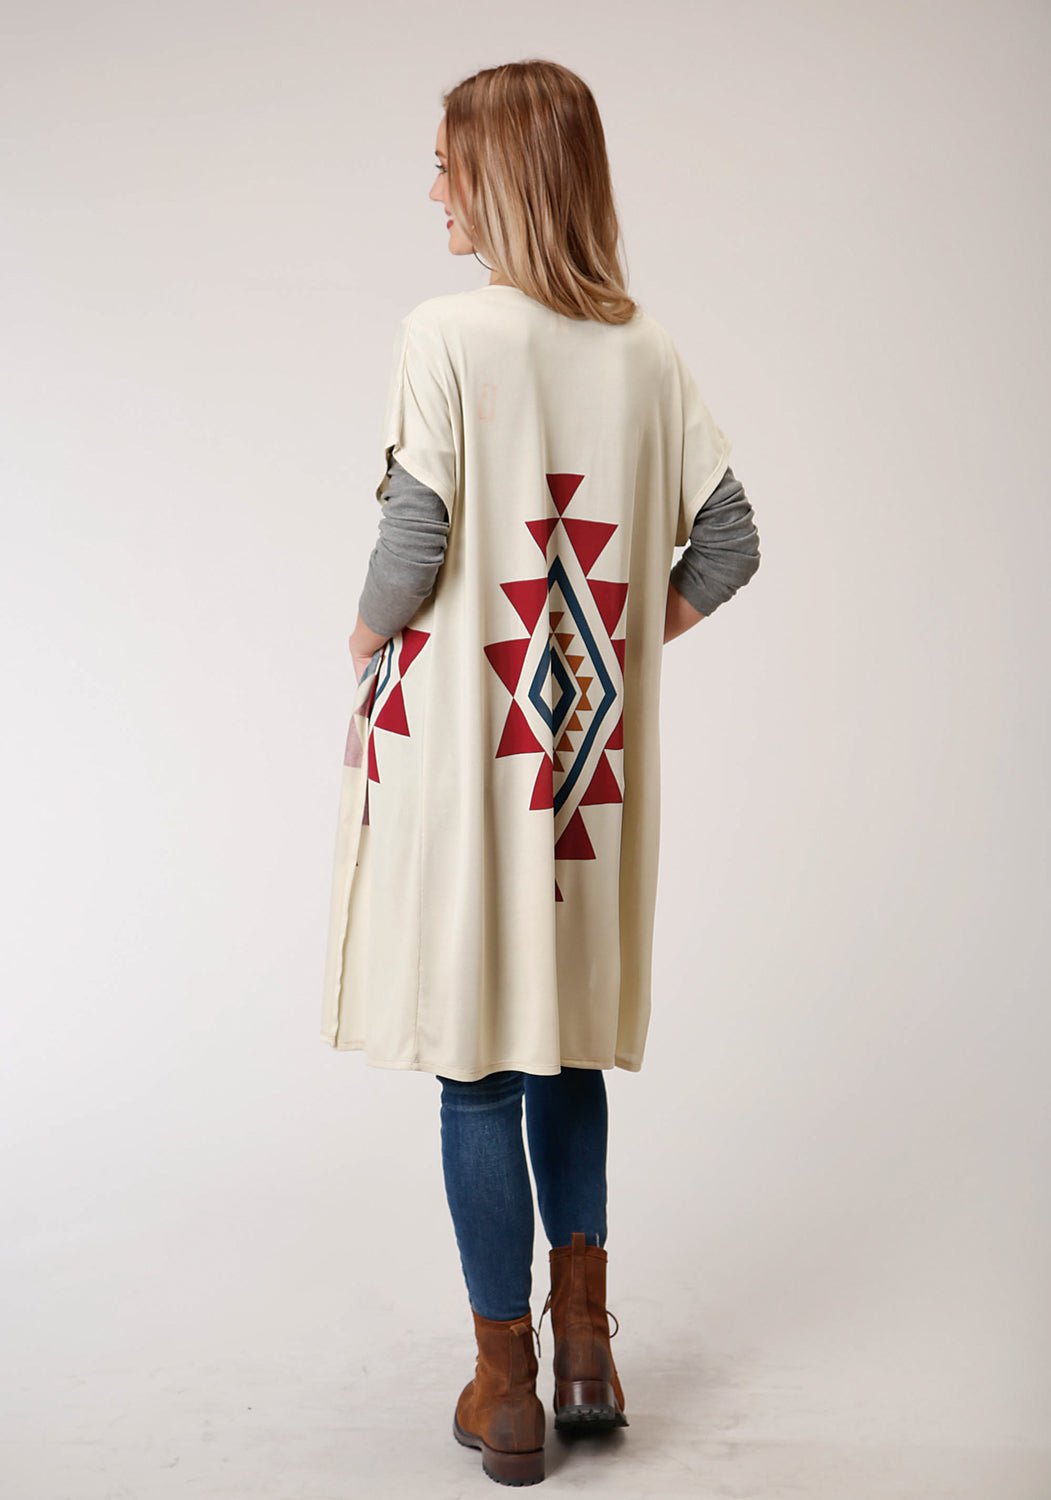 Roper Womens Cream Polyester Aztec Sweater Cardigan – The Western Company